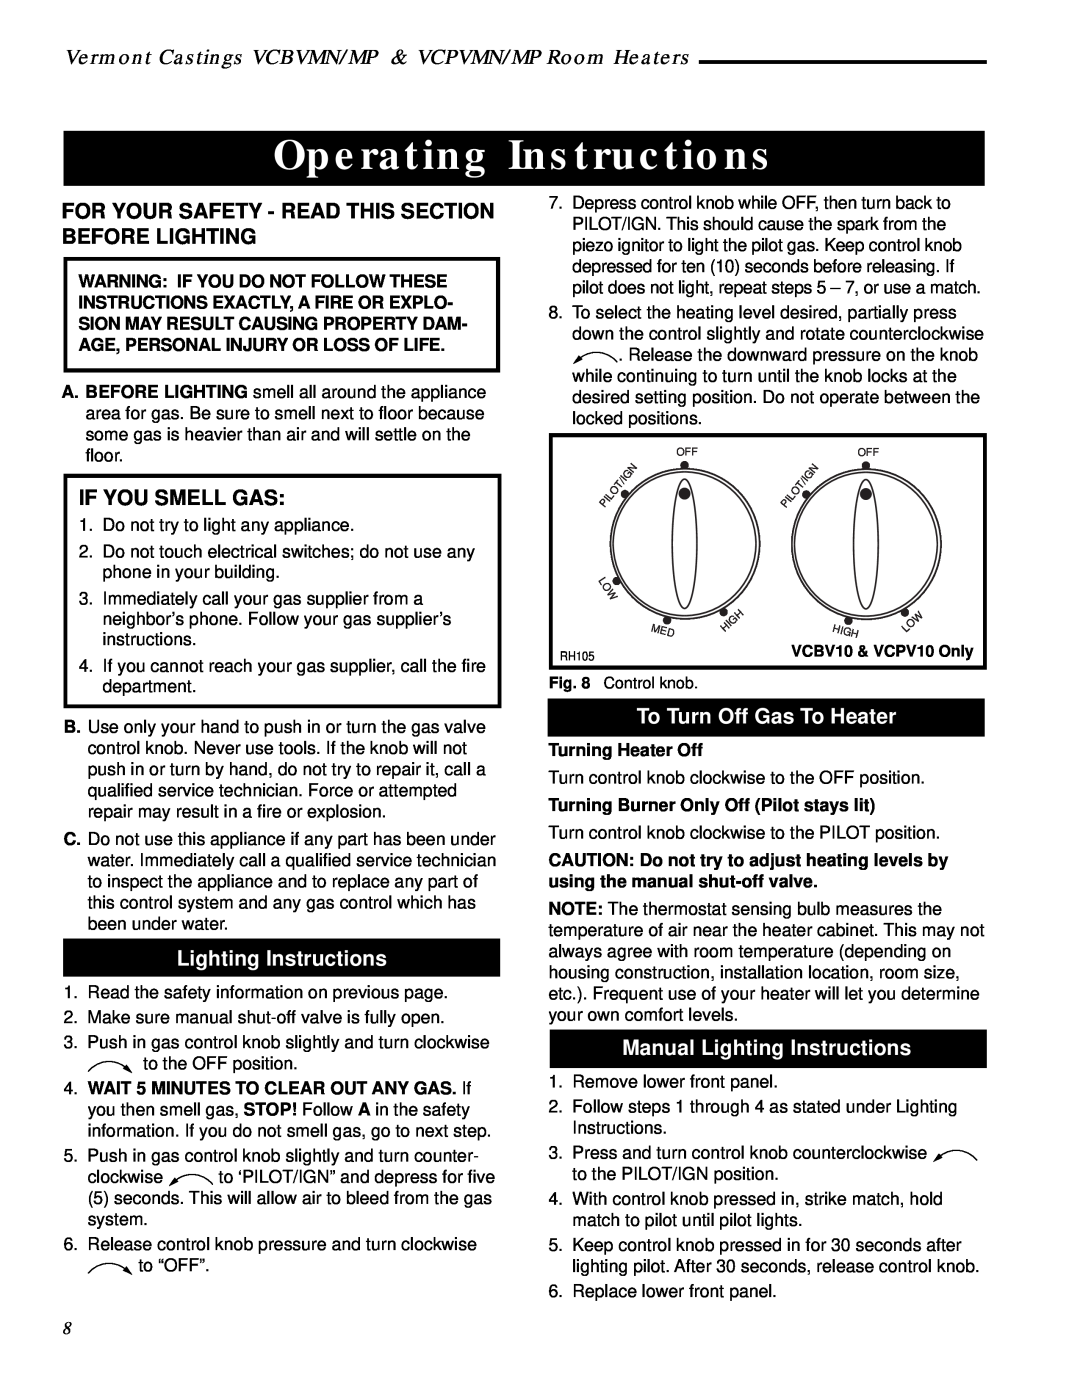 Vermont Casting VCPV18, VCPV30 Operating Instructions, If You Smell Gas, Lighting Instructions, To Turn Off Gas To Heater 